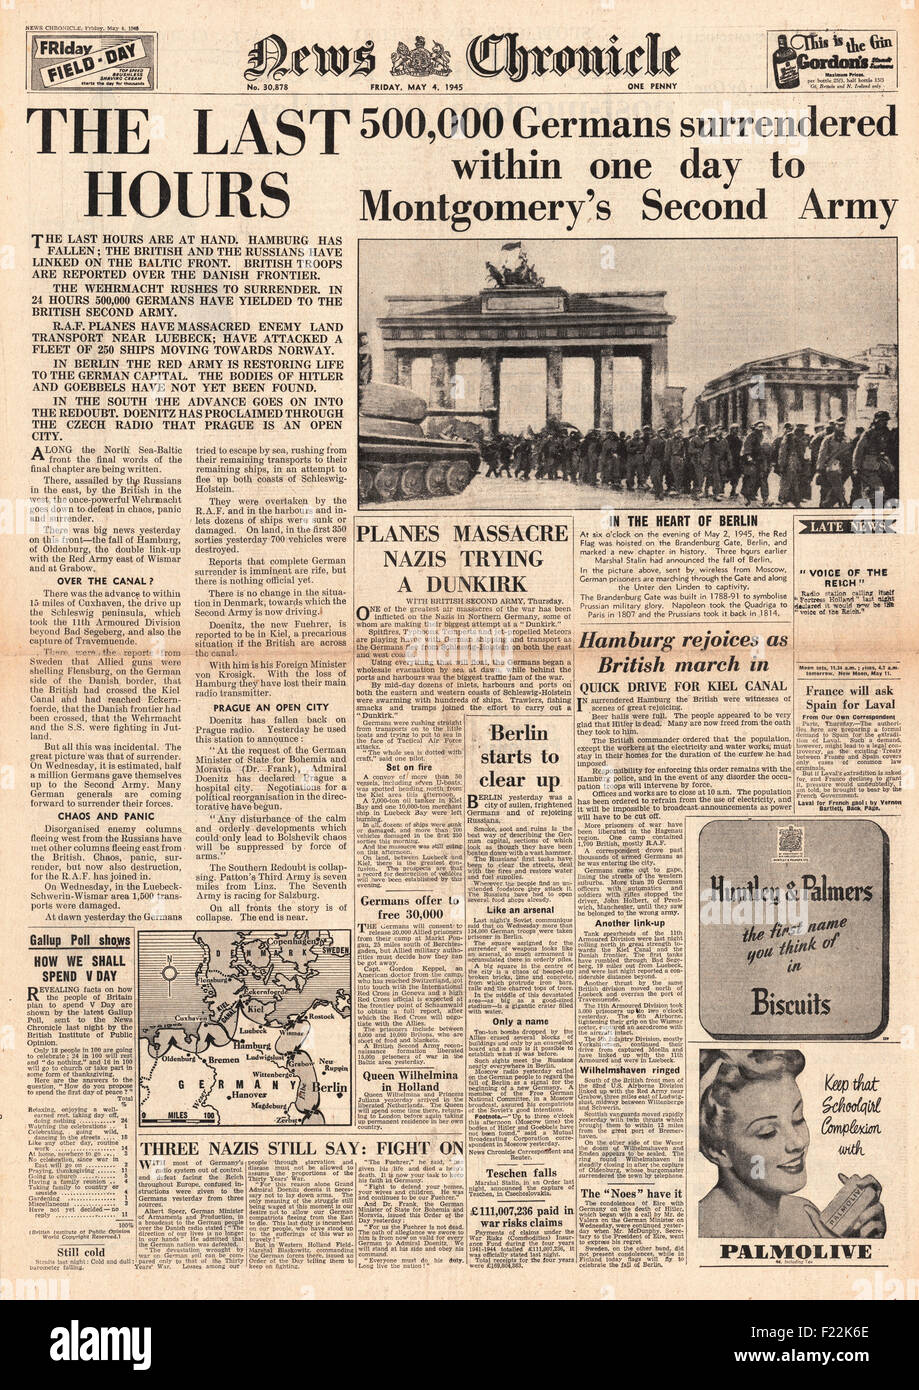 1945 News Chronicle front page reporting Last Hours of the Third Reich Stock Photo